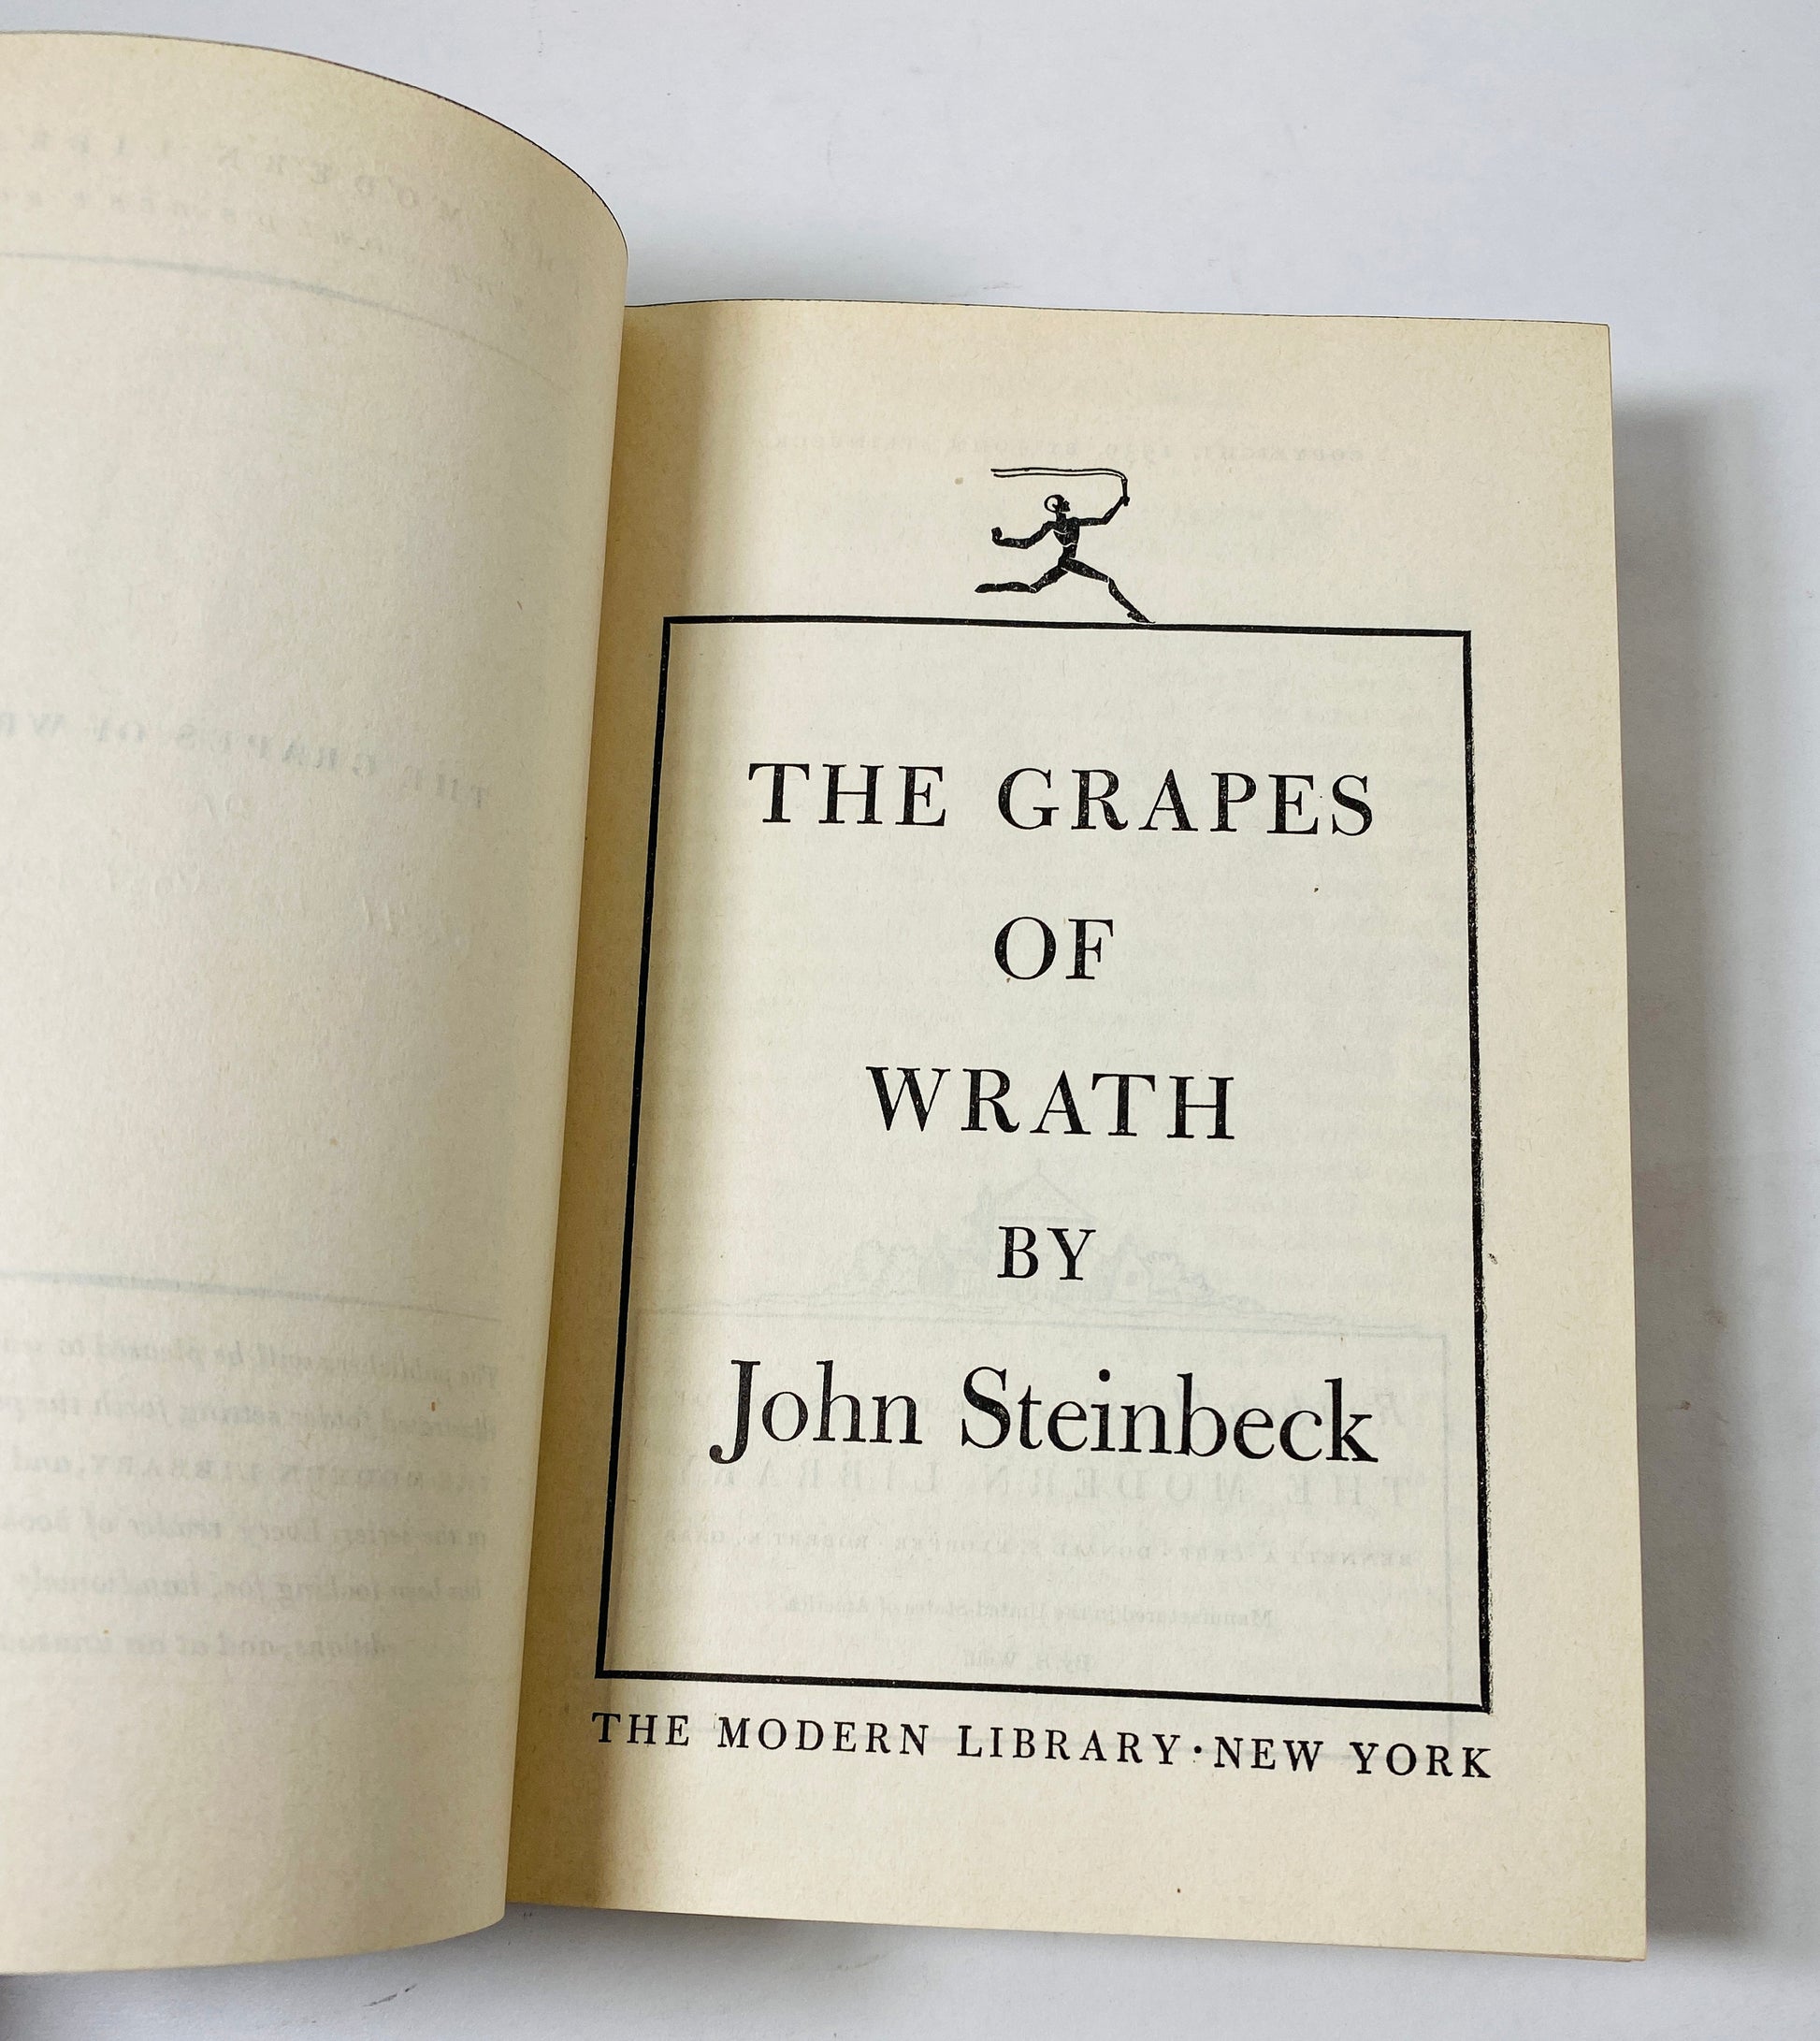 Grapes of Wrath vintage book by John Steinbeck Modern Library circa 1939 with dust jacket and green cloth binding book decor Literature gift